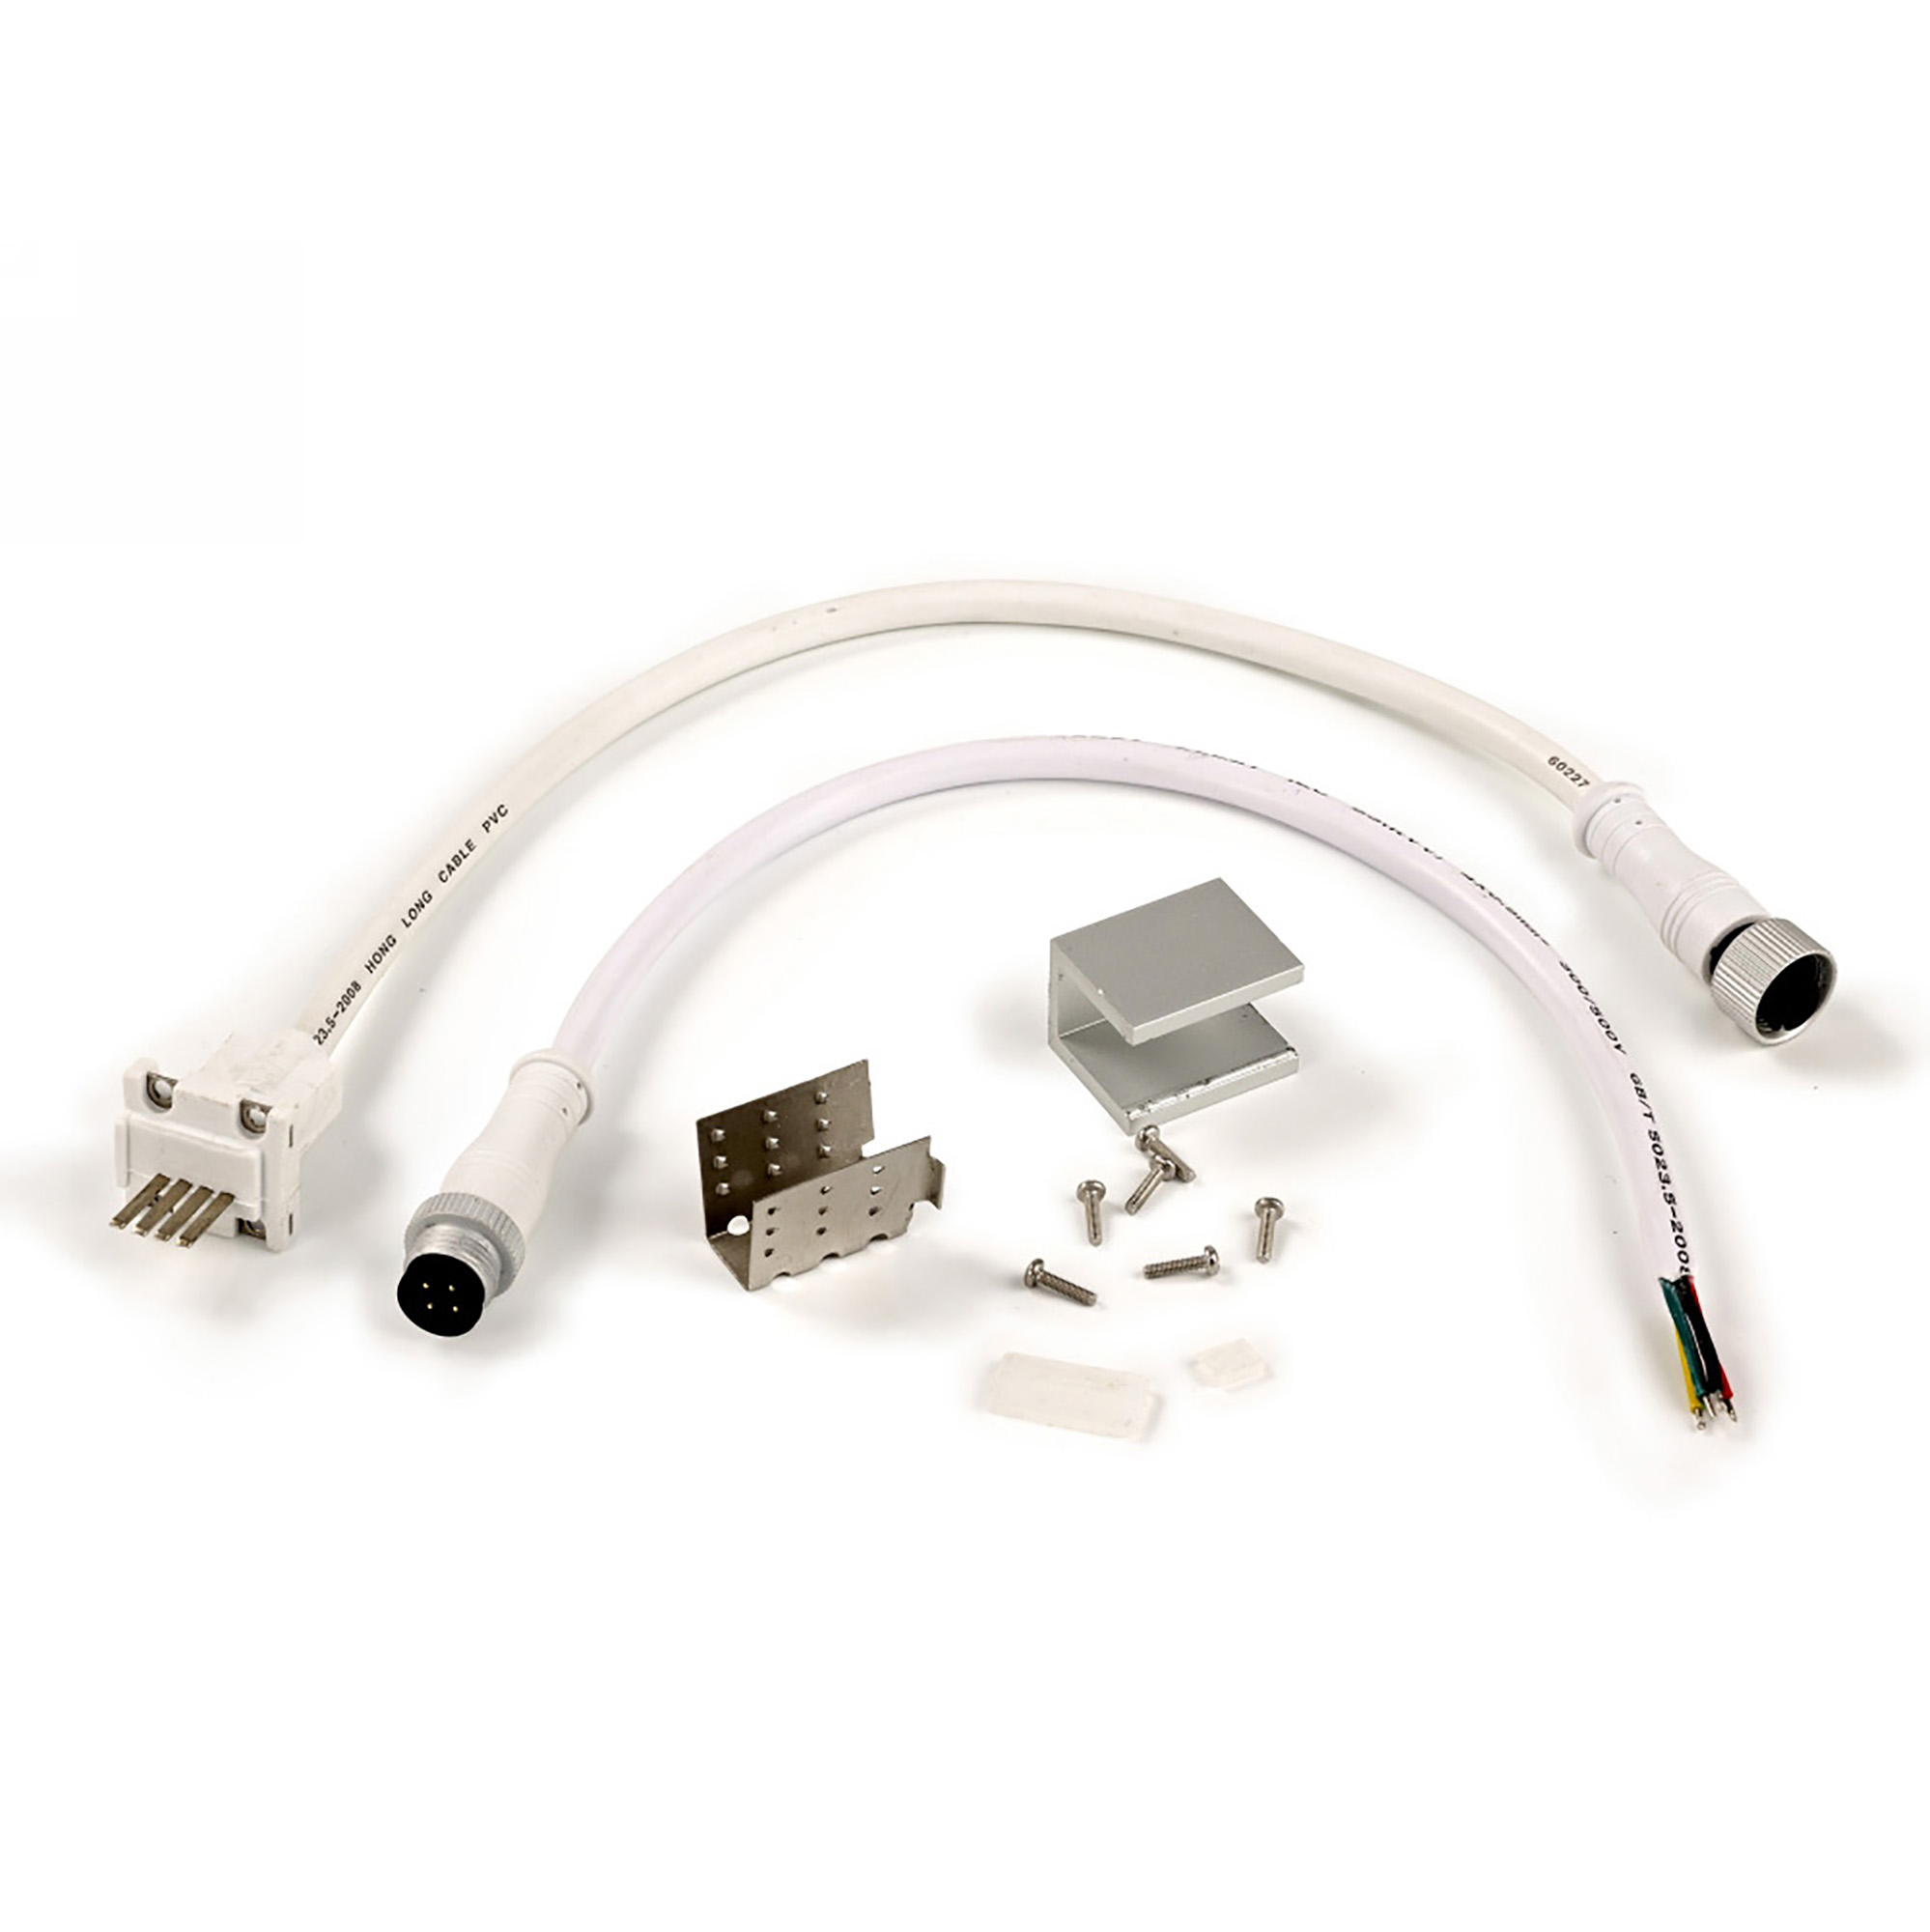 DX770052  Nexi Pixel SF/SR, Front Right Side Connection Kit 0.6m Cable IP67/68